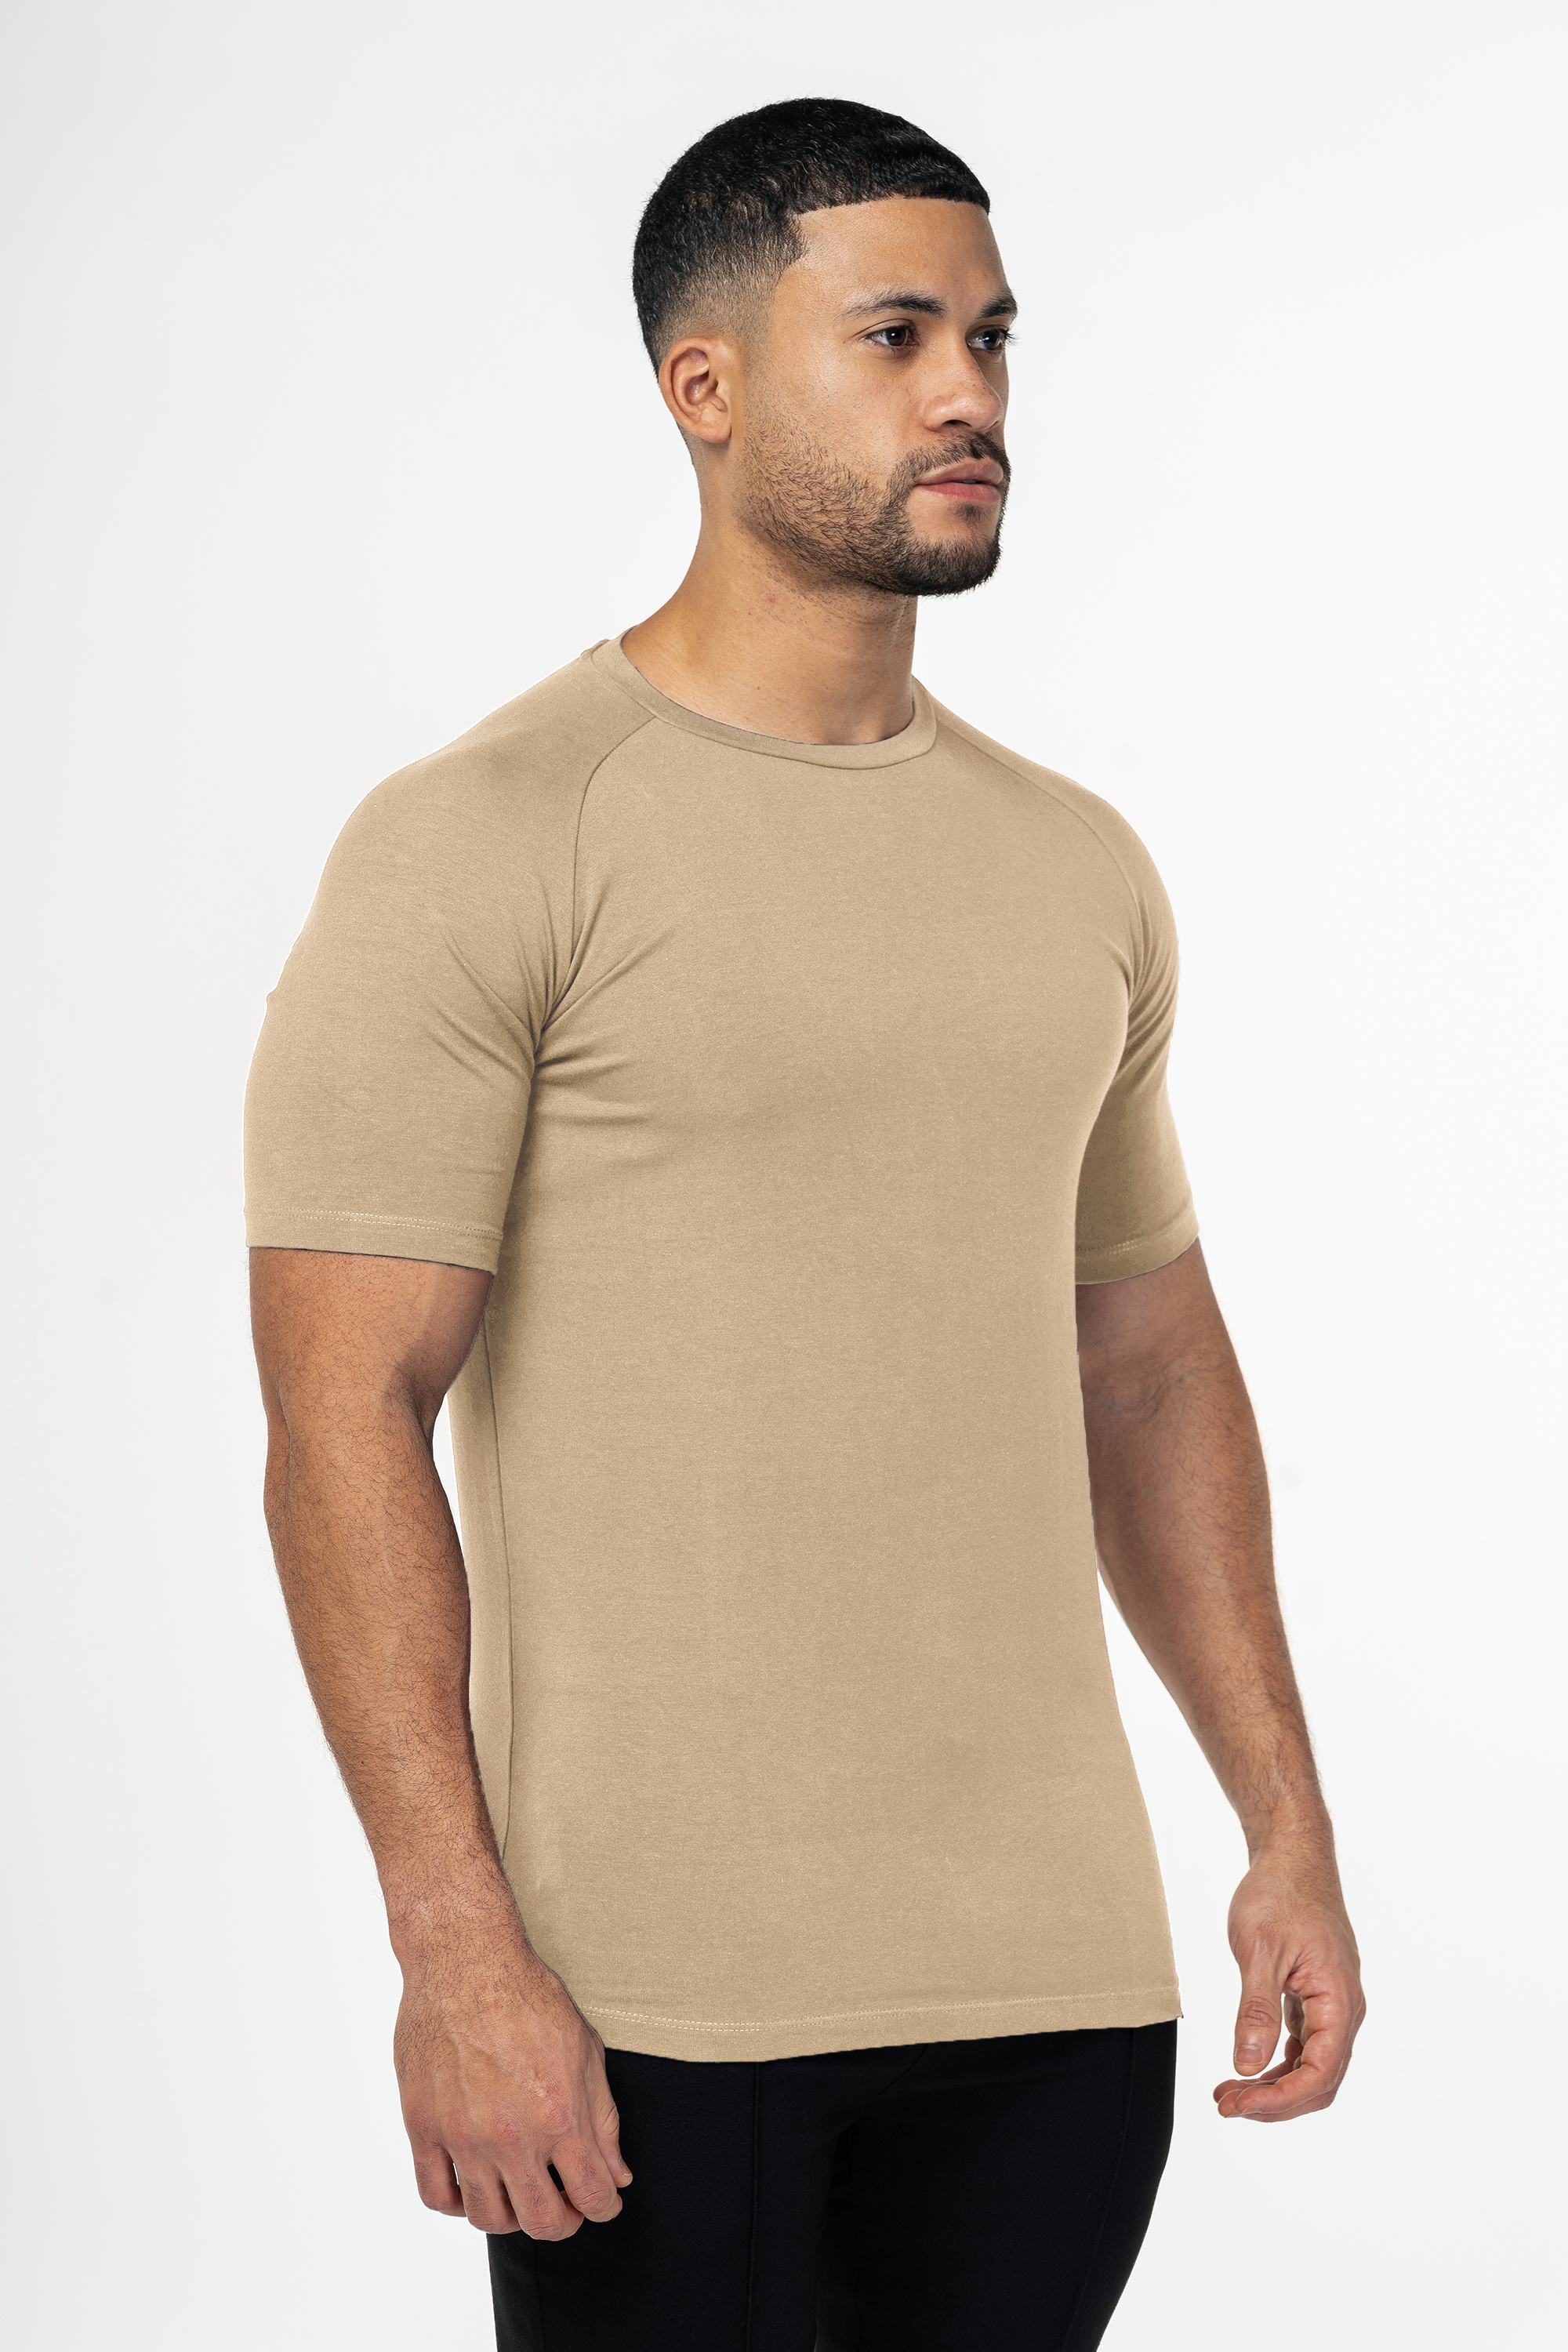 THE MUSCLE BASIC T-SHIRT - CREMA IRLANDESE